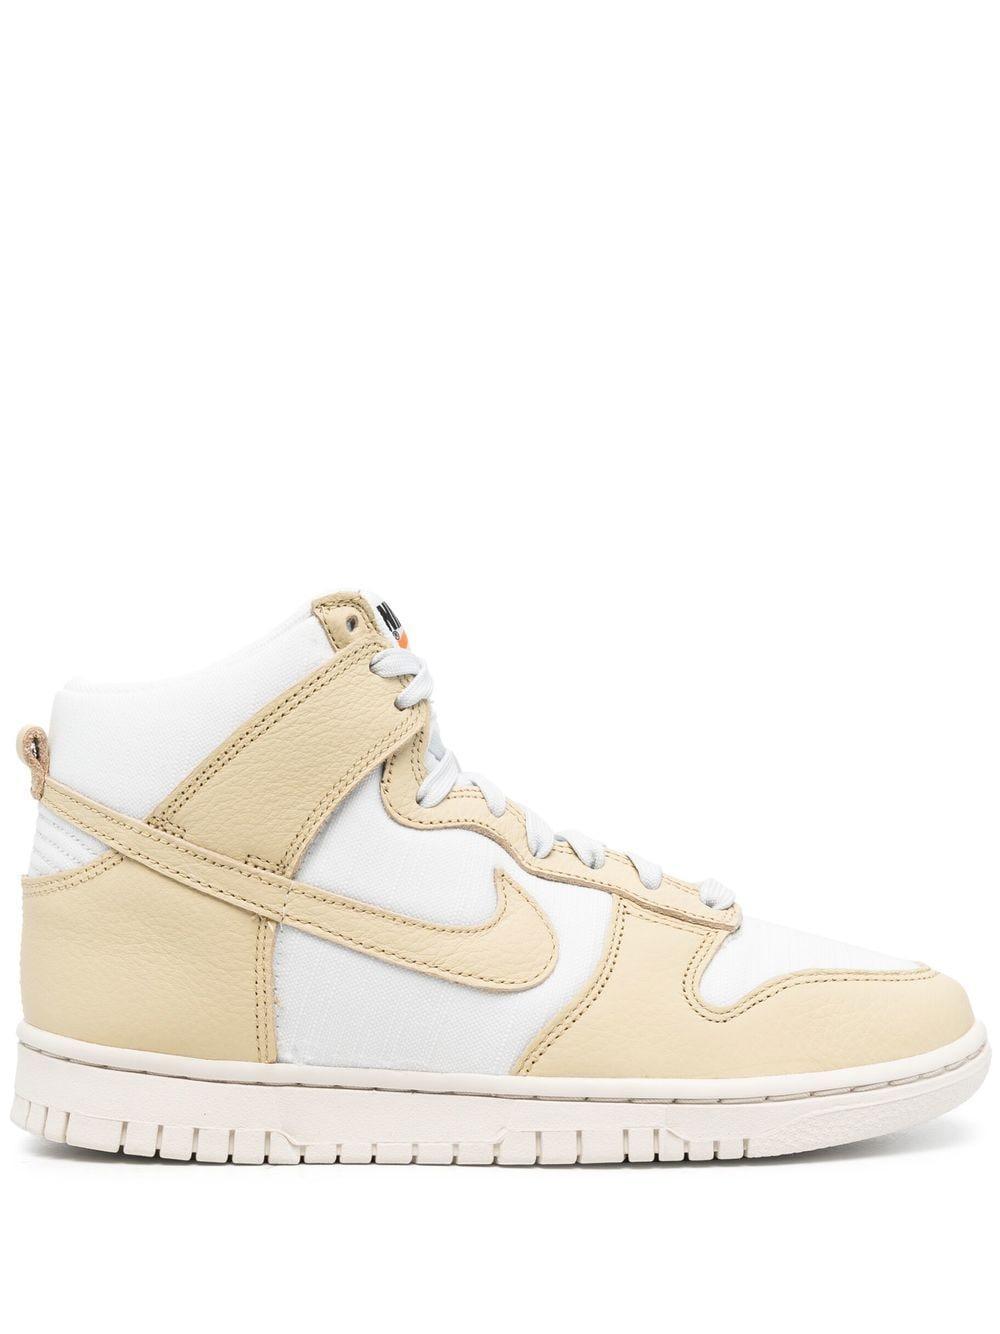 Nike Dunk High Lx Team Gold Sneakers in Natural | Lyst